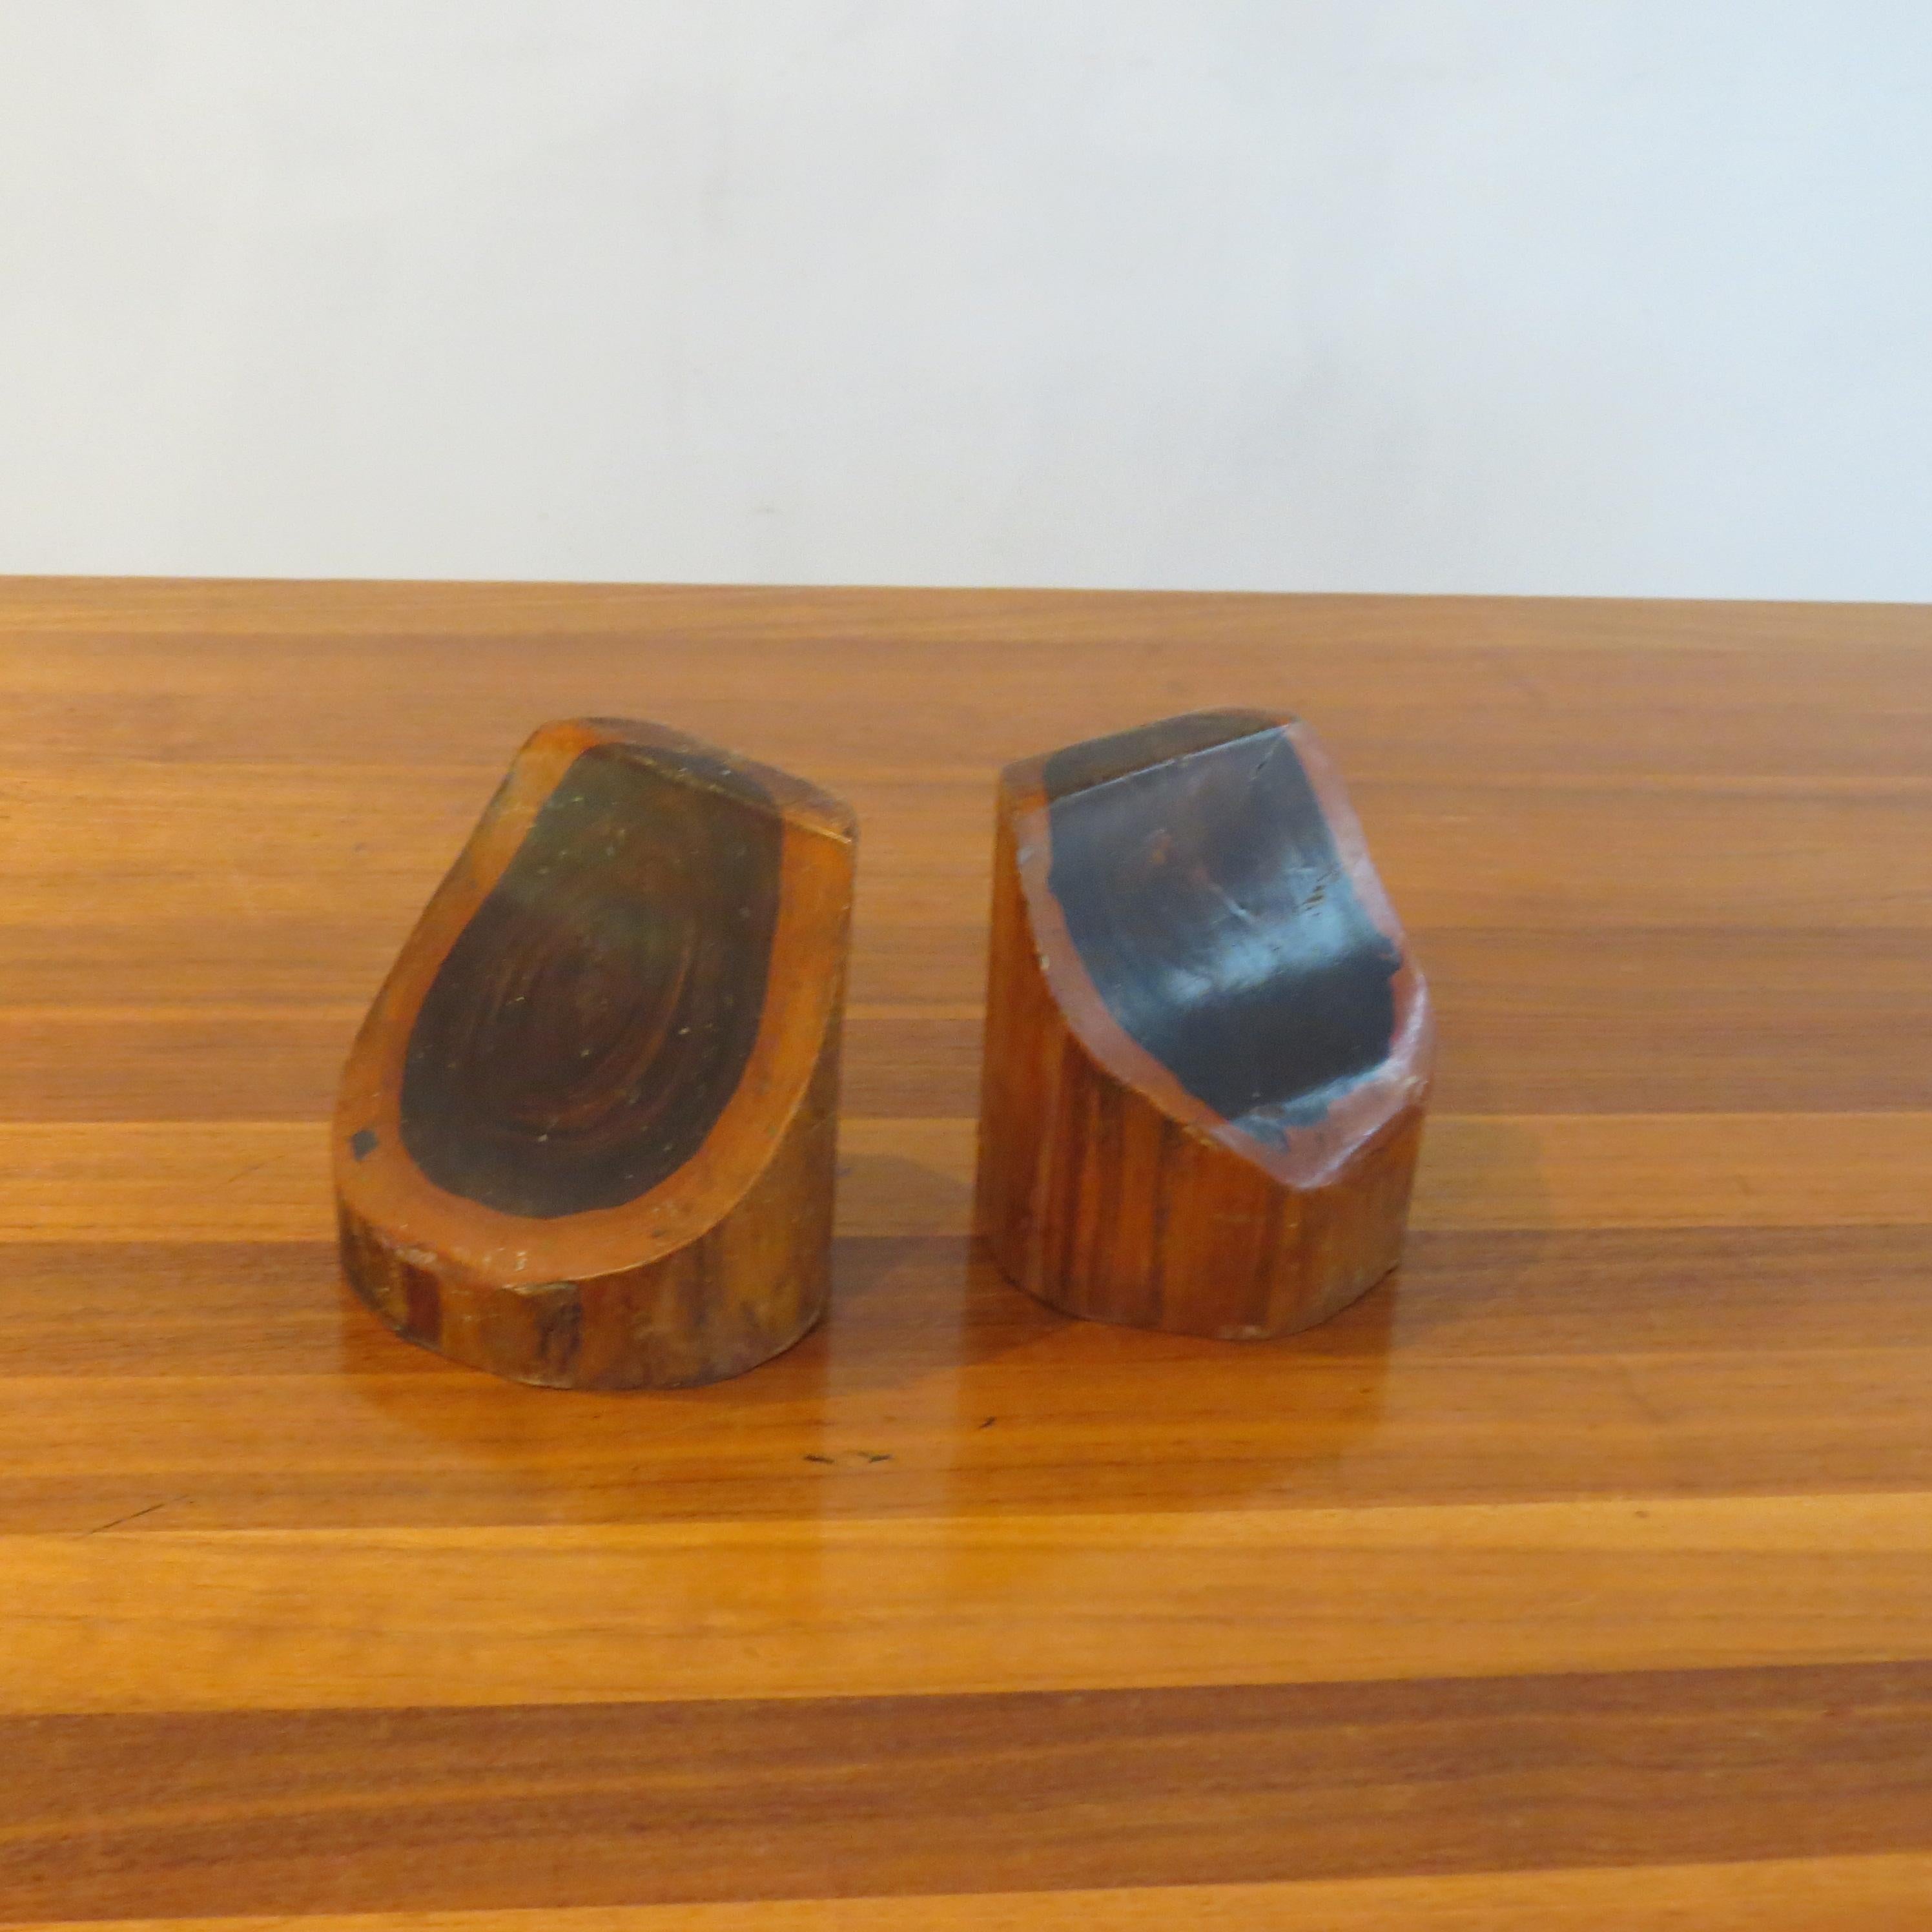 Wonderful, good heavy pair of sculptural book ends from the 1960s. Made from solid Laburnum, they have been hand crafted, leaving a naturalistic edge to them. Very nicely mellowed over time, the laburnum gives a striking contrast in colour. Intended